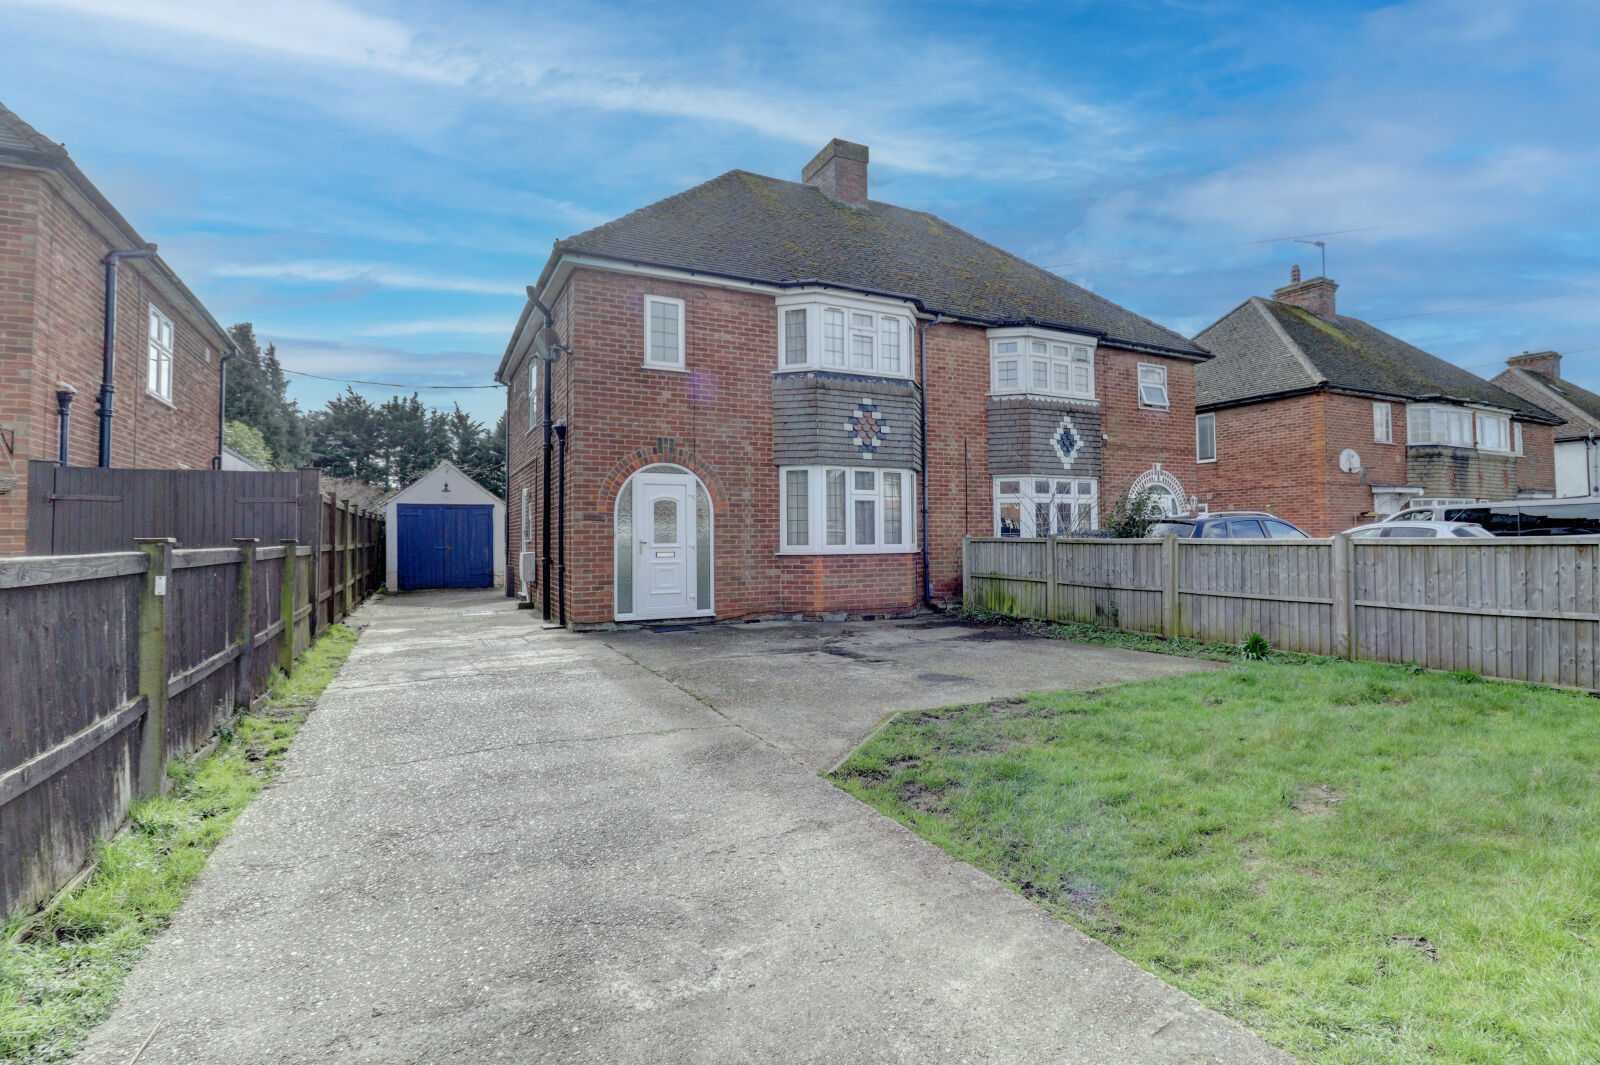 3 bedroom semi detached house for sale Cressex Road, High Wycombe, HP12, main image